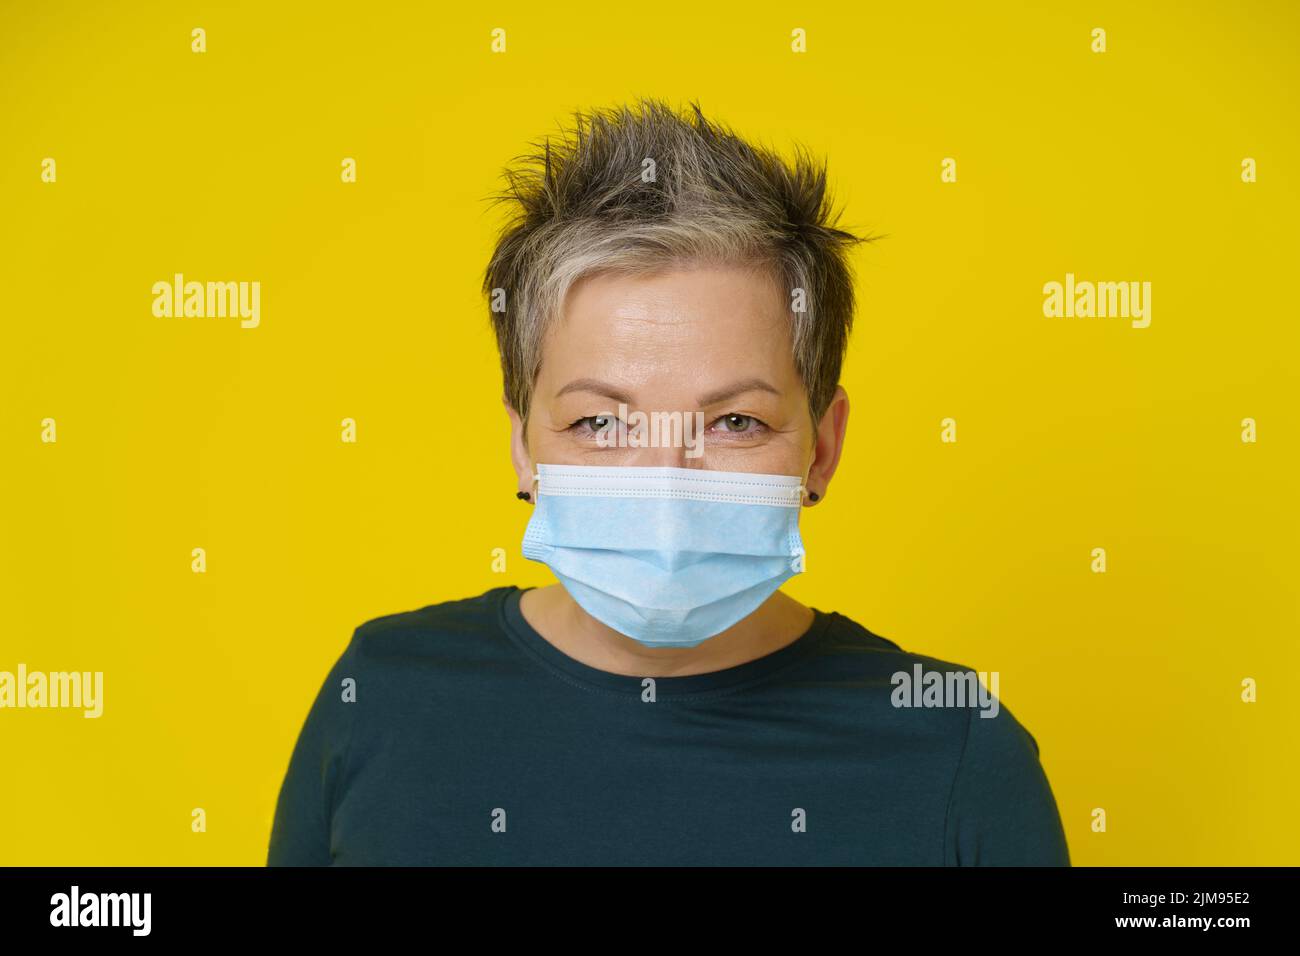 Mature woman wearing medical face mask with happy eyes smiling looking at camera wearing green blouse isolated on yellow background. Close up adult woman in medical mask.  Stock Photo